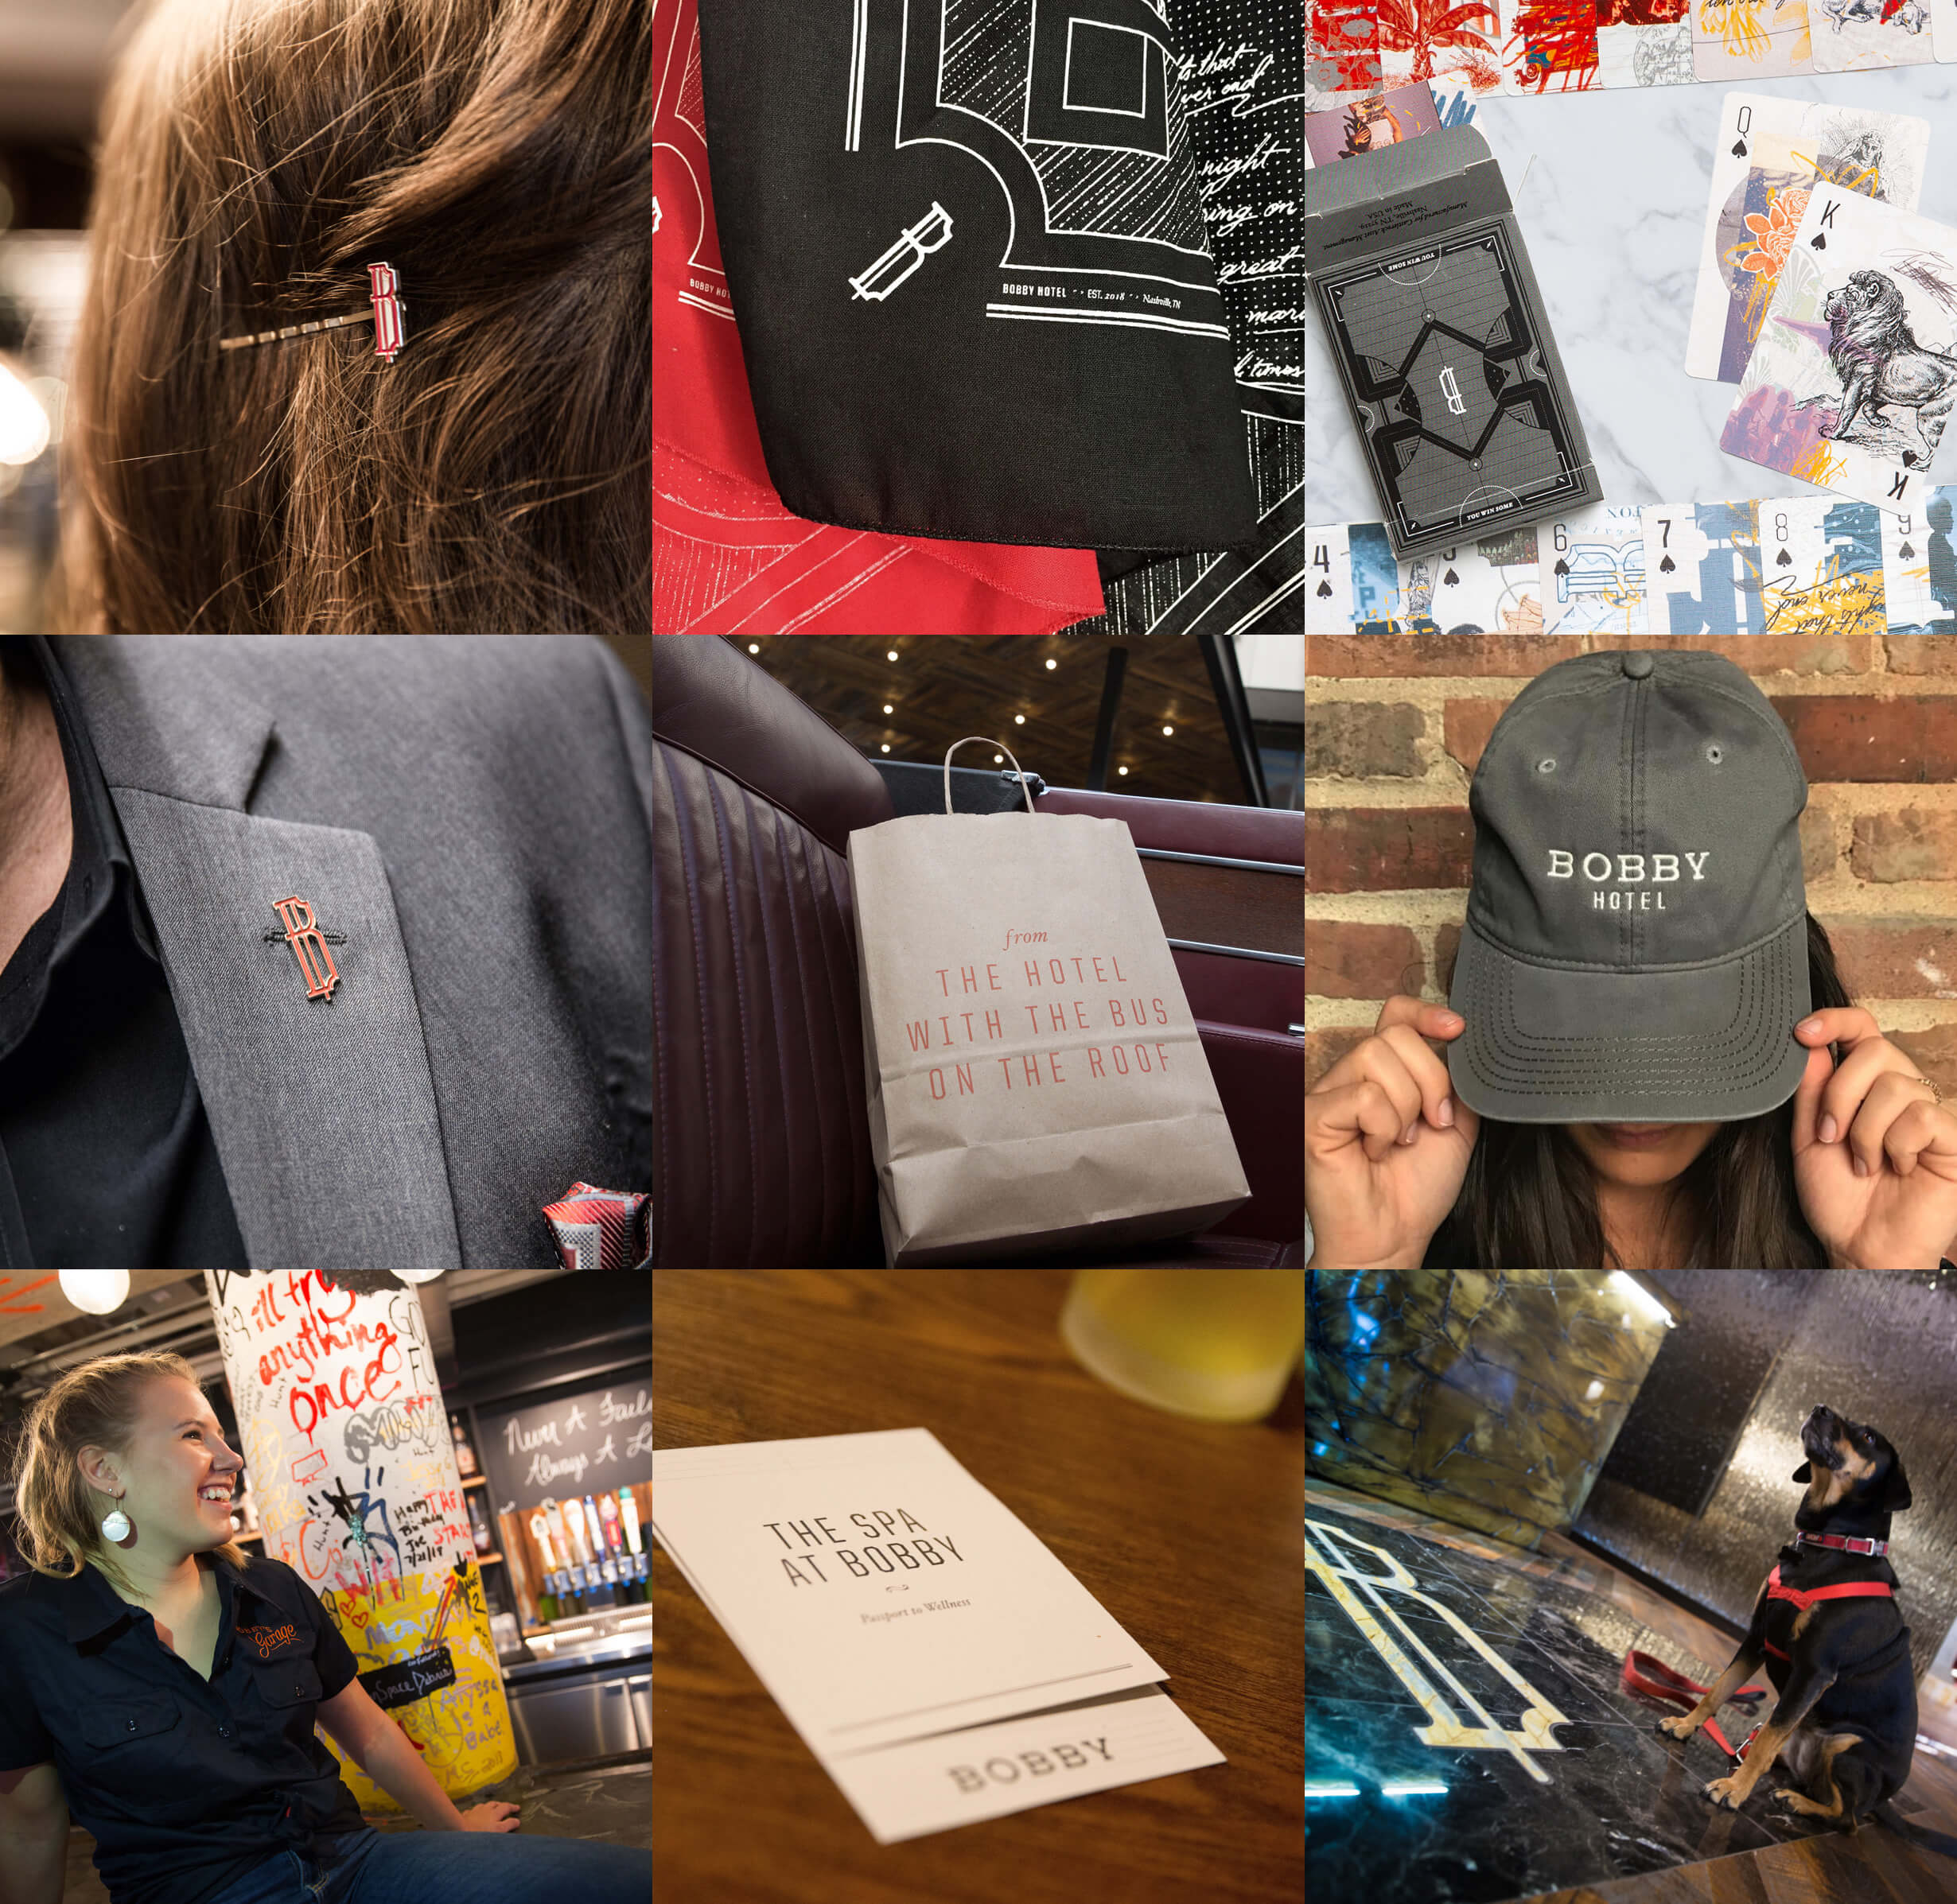 Bobby Hotel branding identity printed on merchandise and collateral including bandana, hat, pin, bag, bus, playing cards, hair clip in Nashville TN